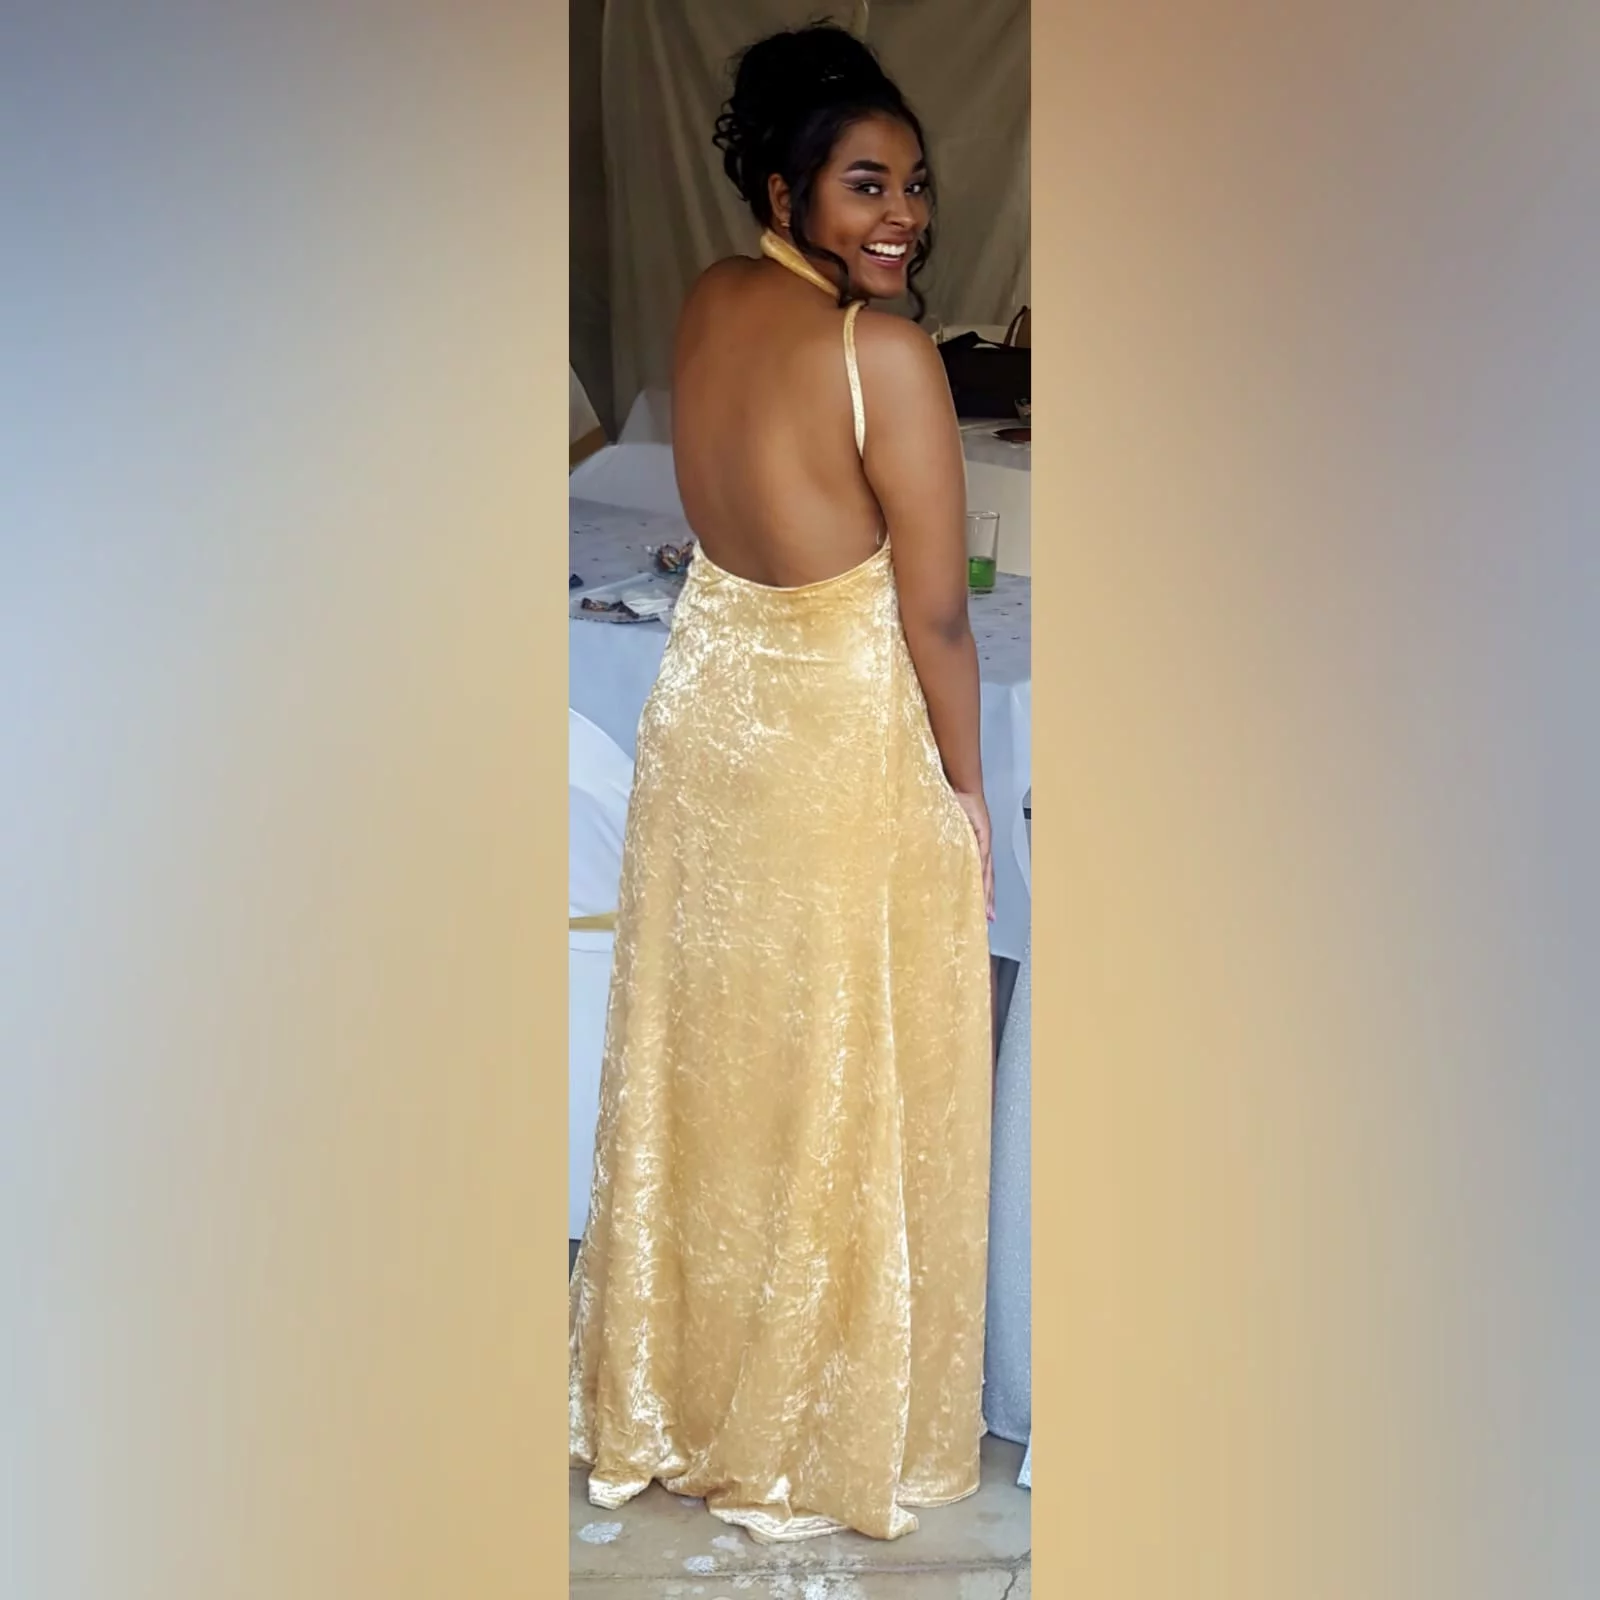 Champagne velvet long matric dance dress 5 champagne velvet long matric dance dress with a v neckline, rounded backless design with a high slit and a matching choker.